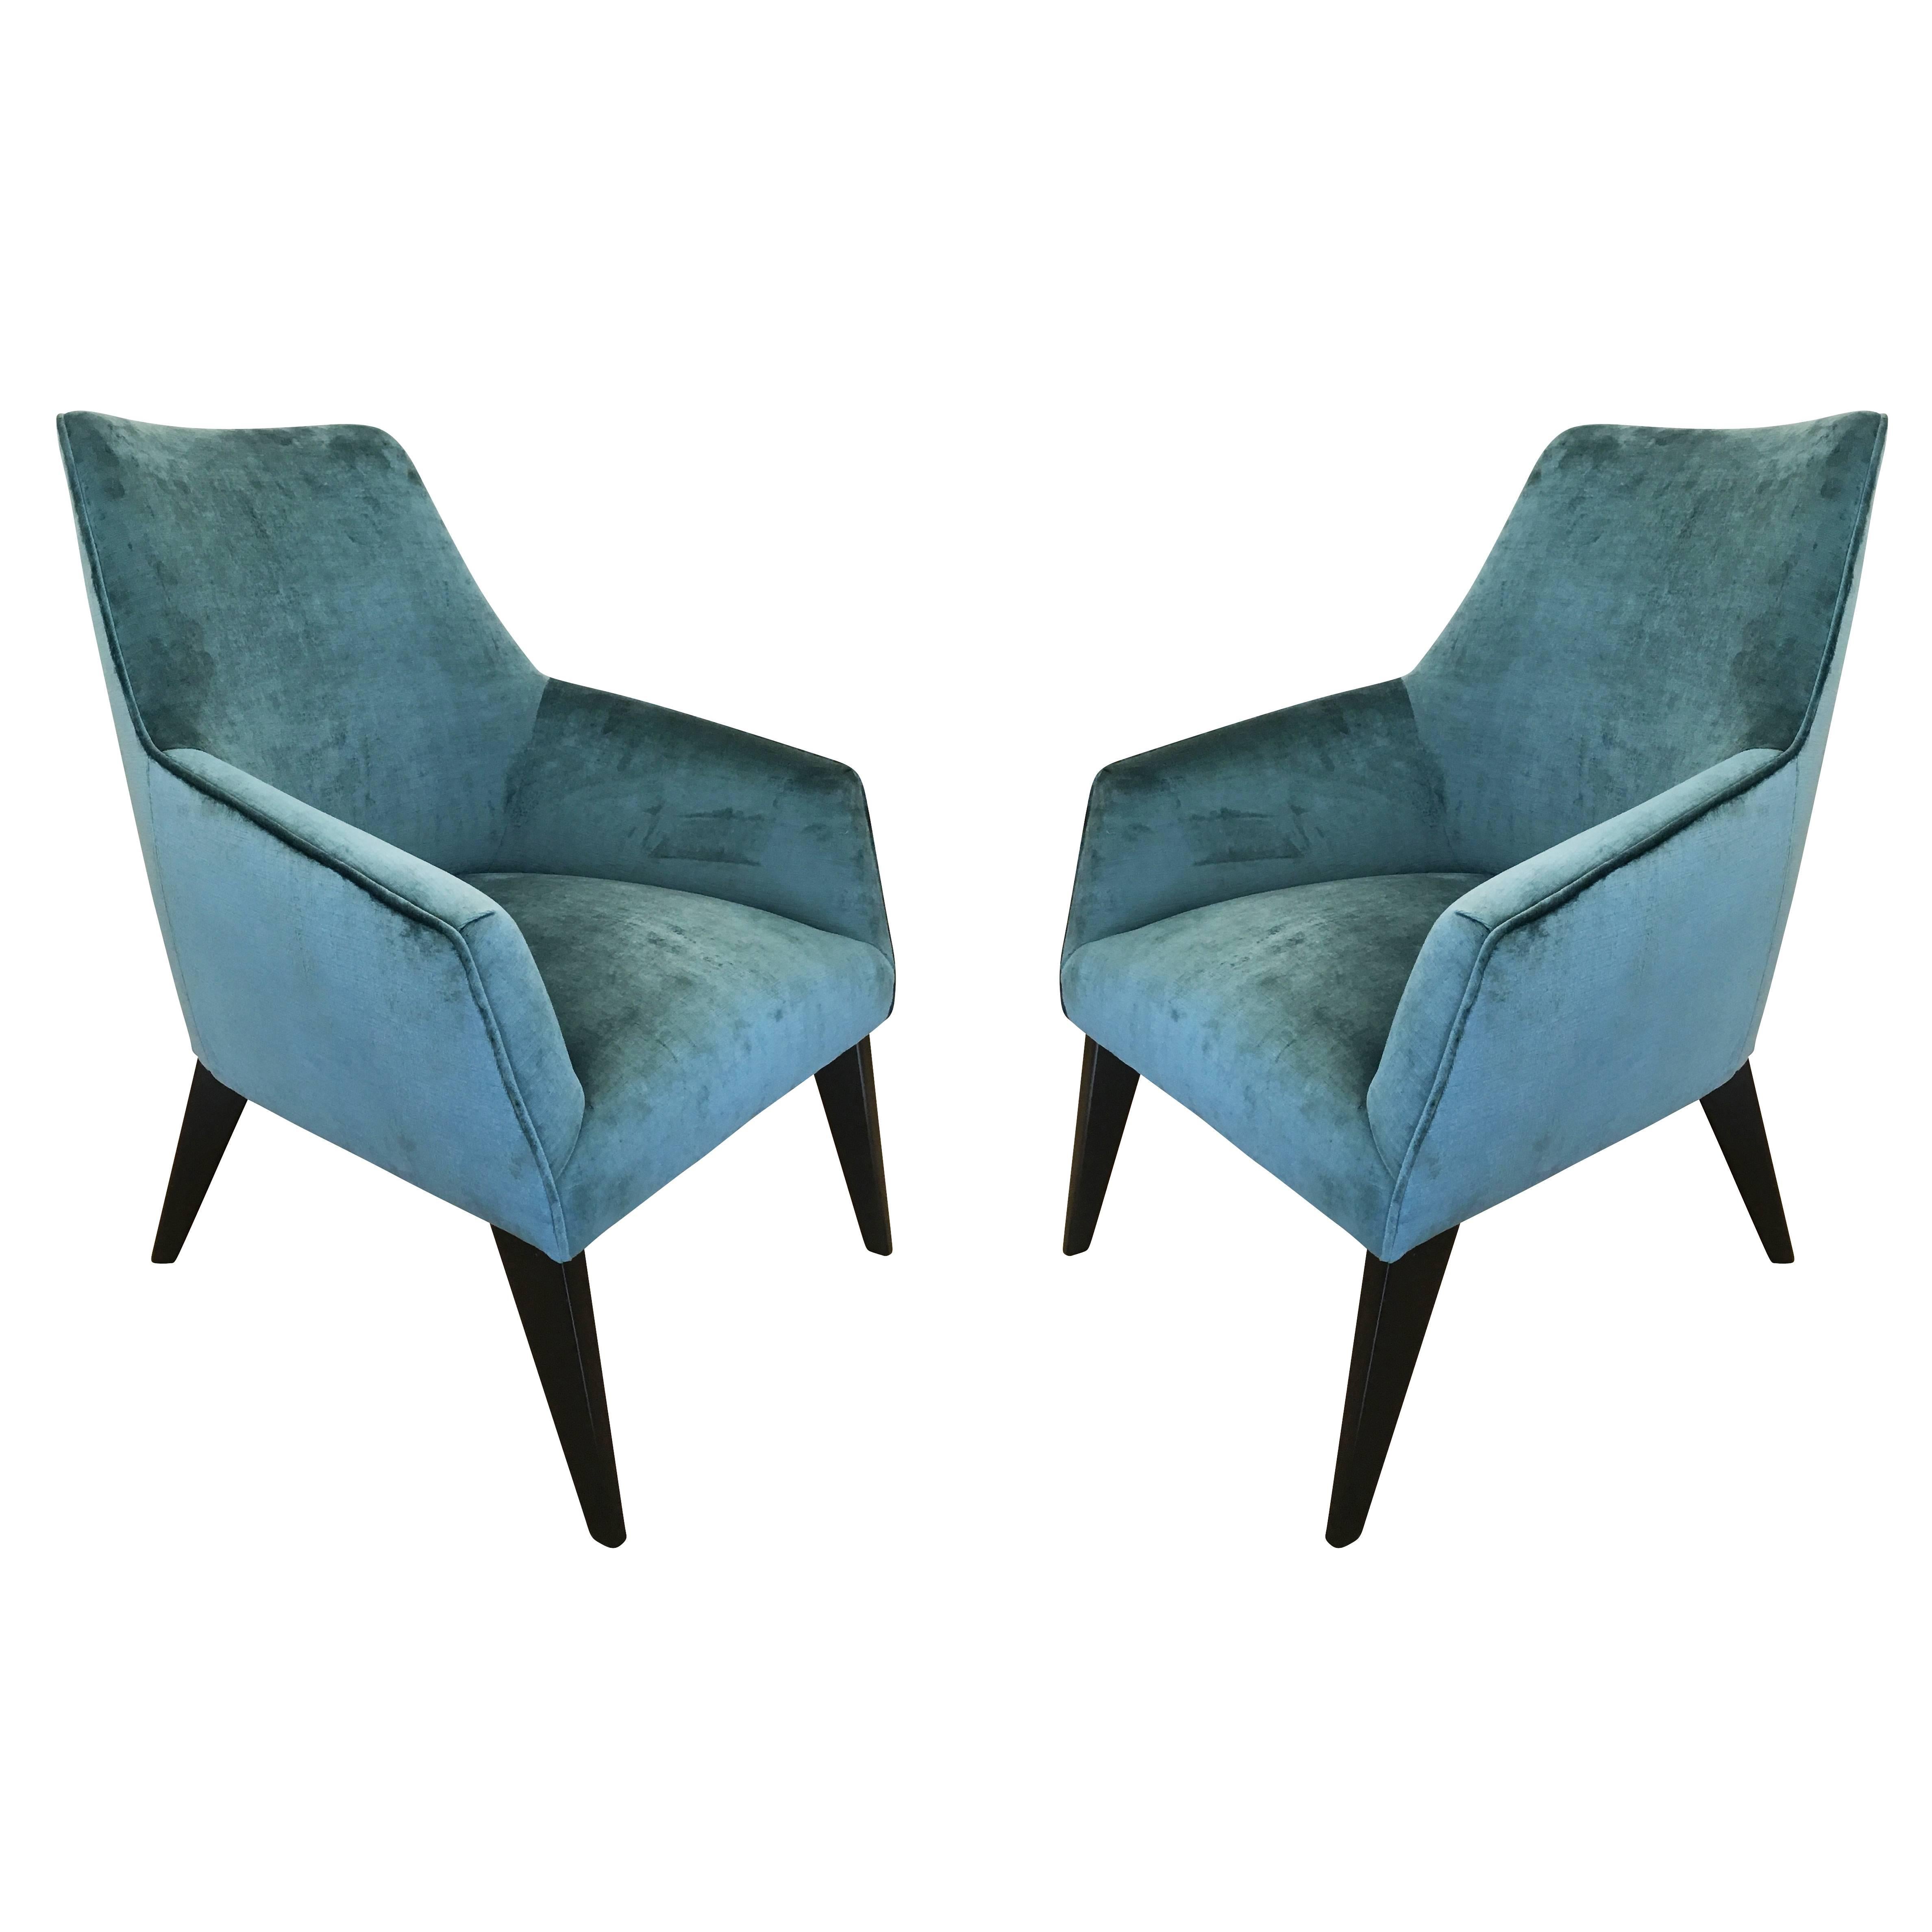 Pair of Armchairs in the Manner of Gio Ponti